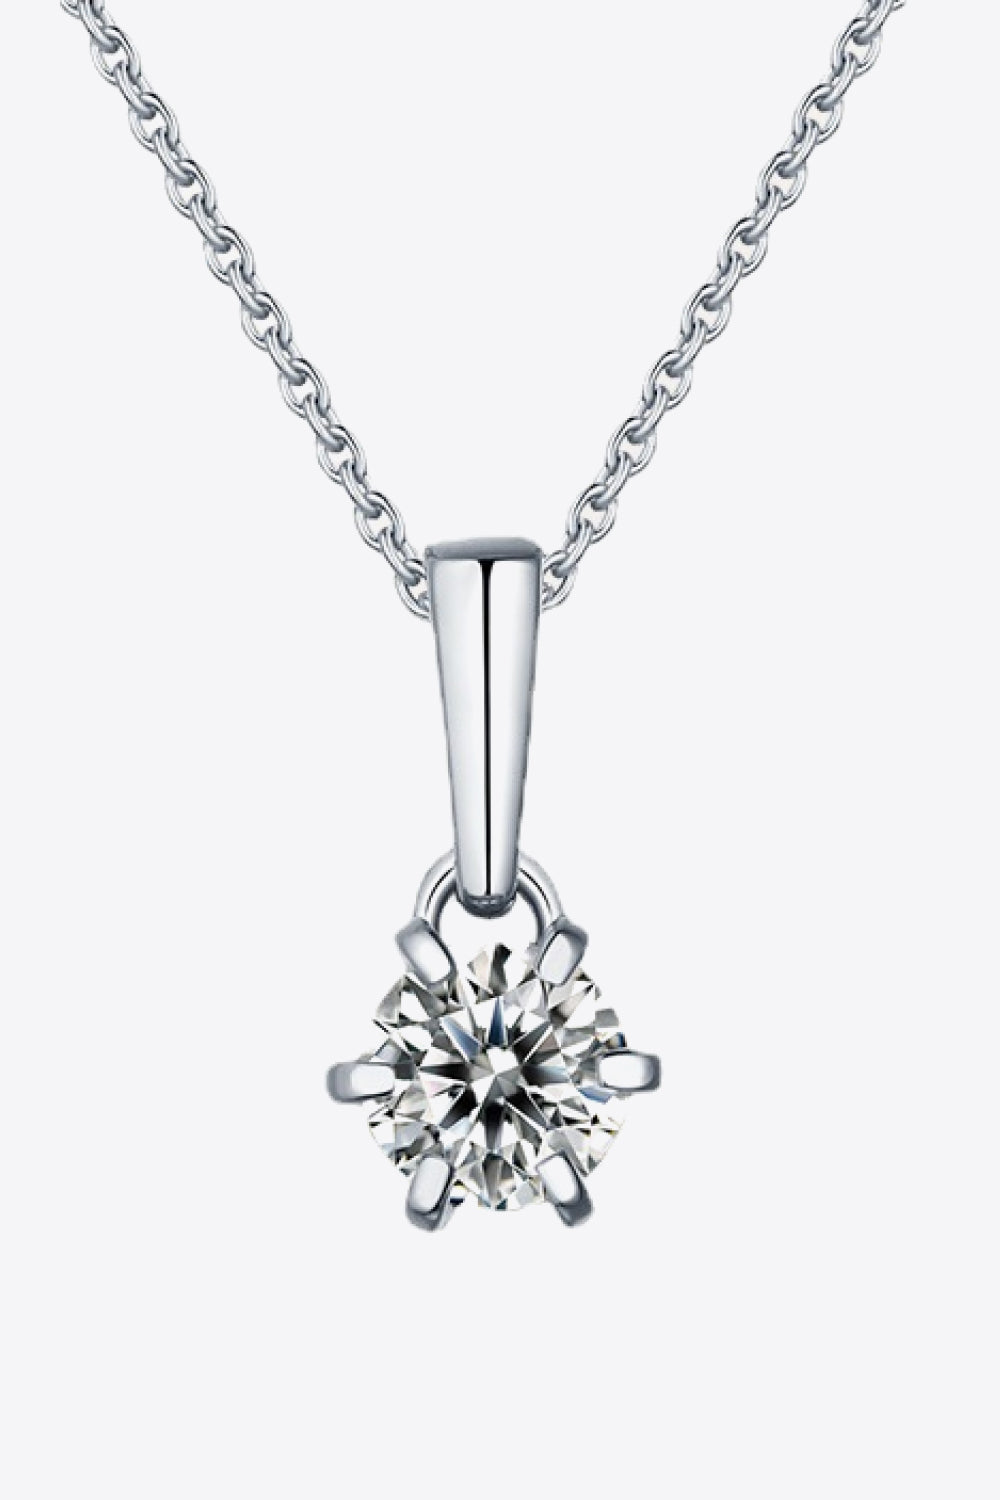 Trendsi Chain Necklaces Silver / One Size 2 Carat 6-Prong Moissanite Pendant Necklace